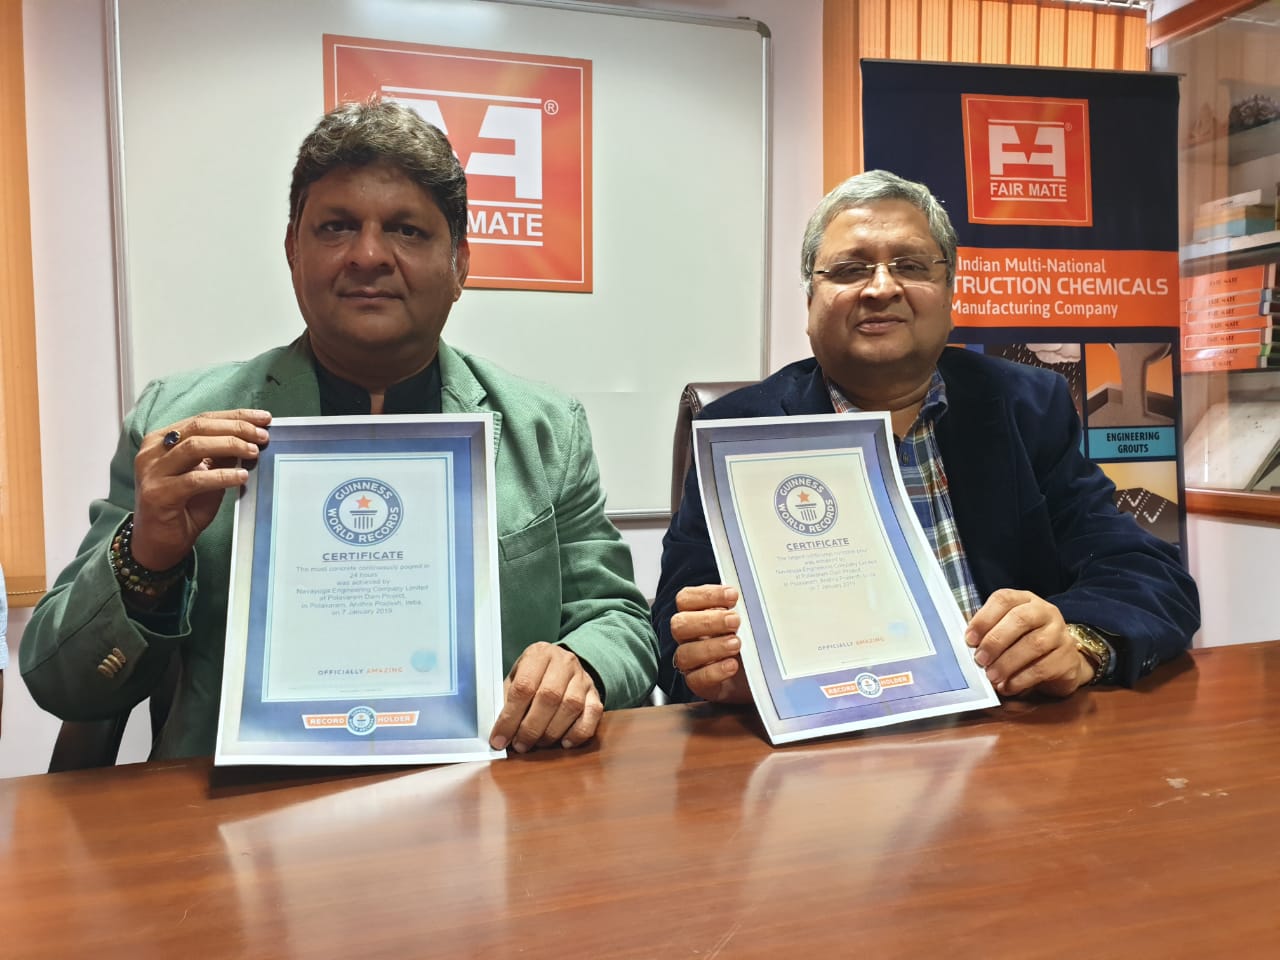 Fairmate Chemicals registered their name in Guinness World Record